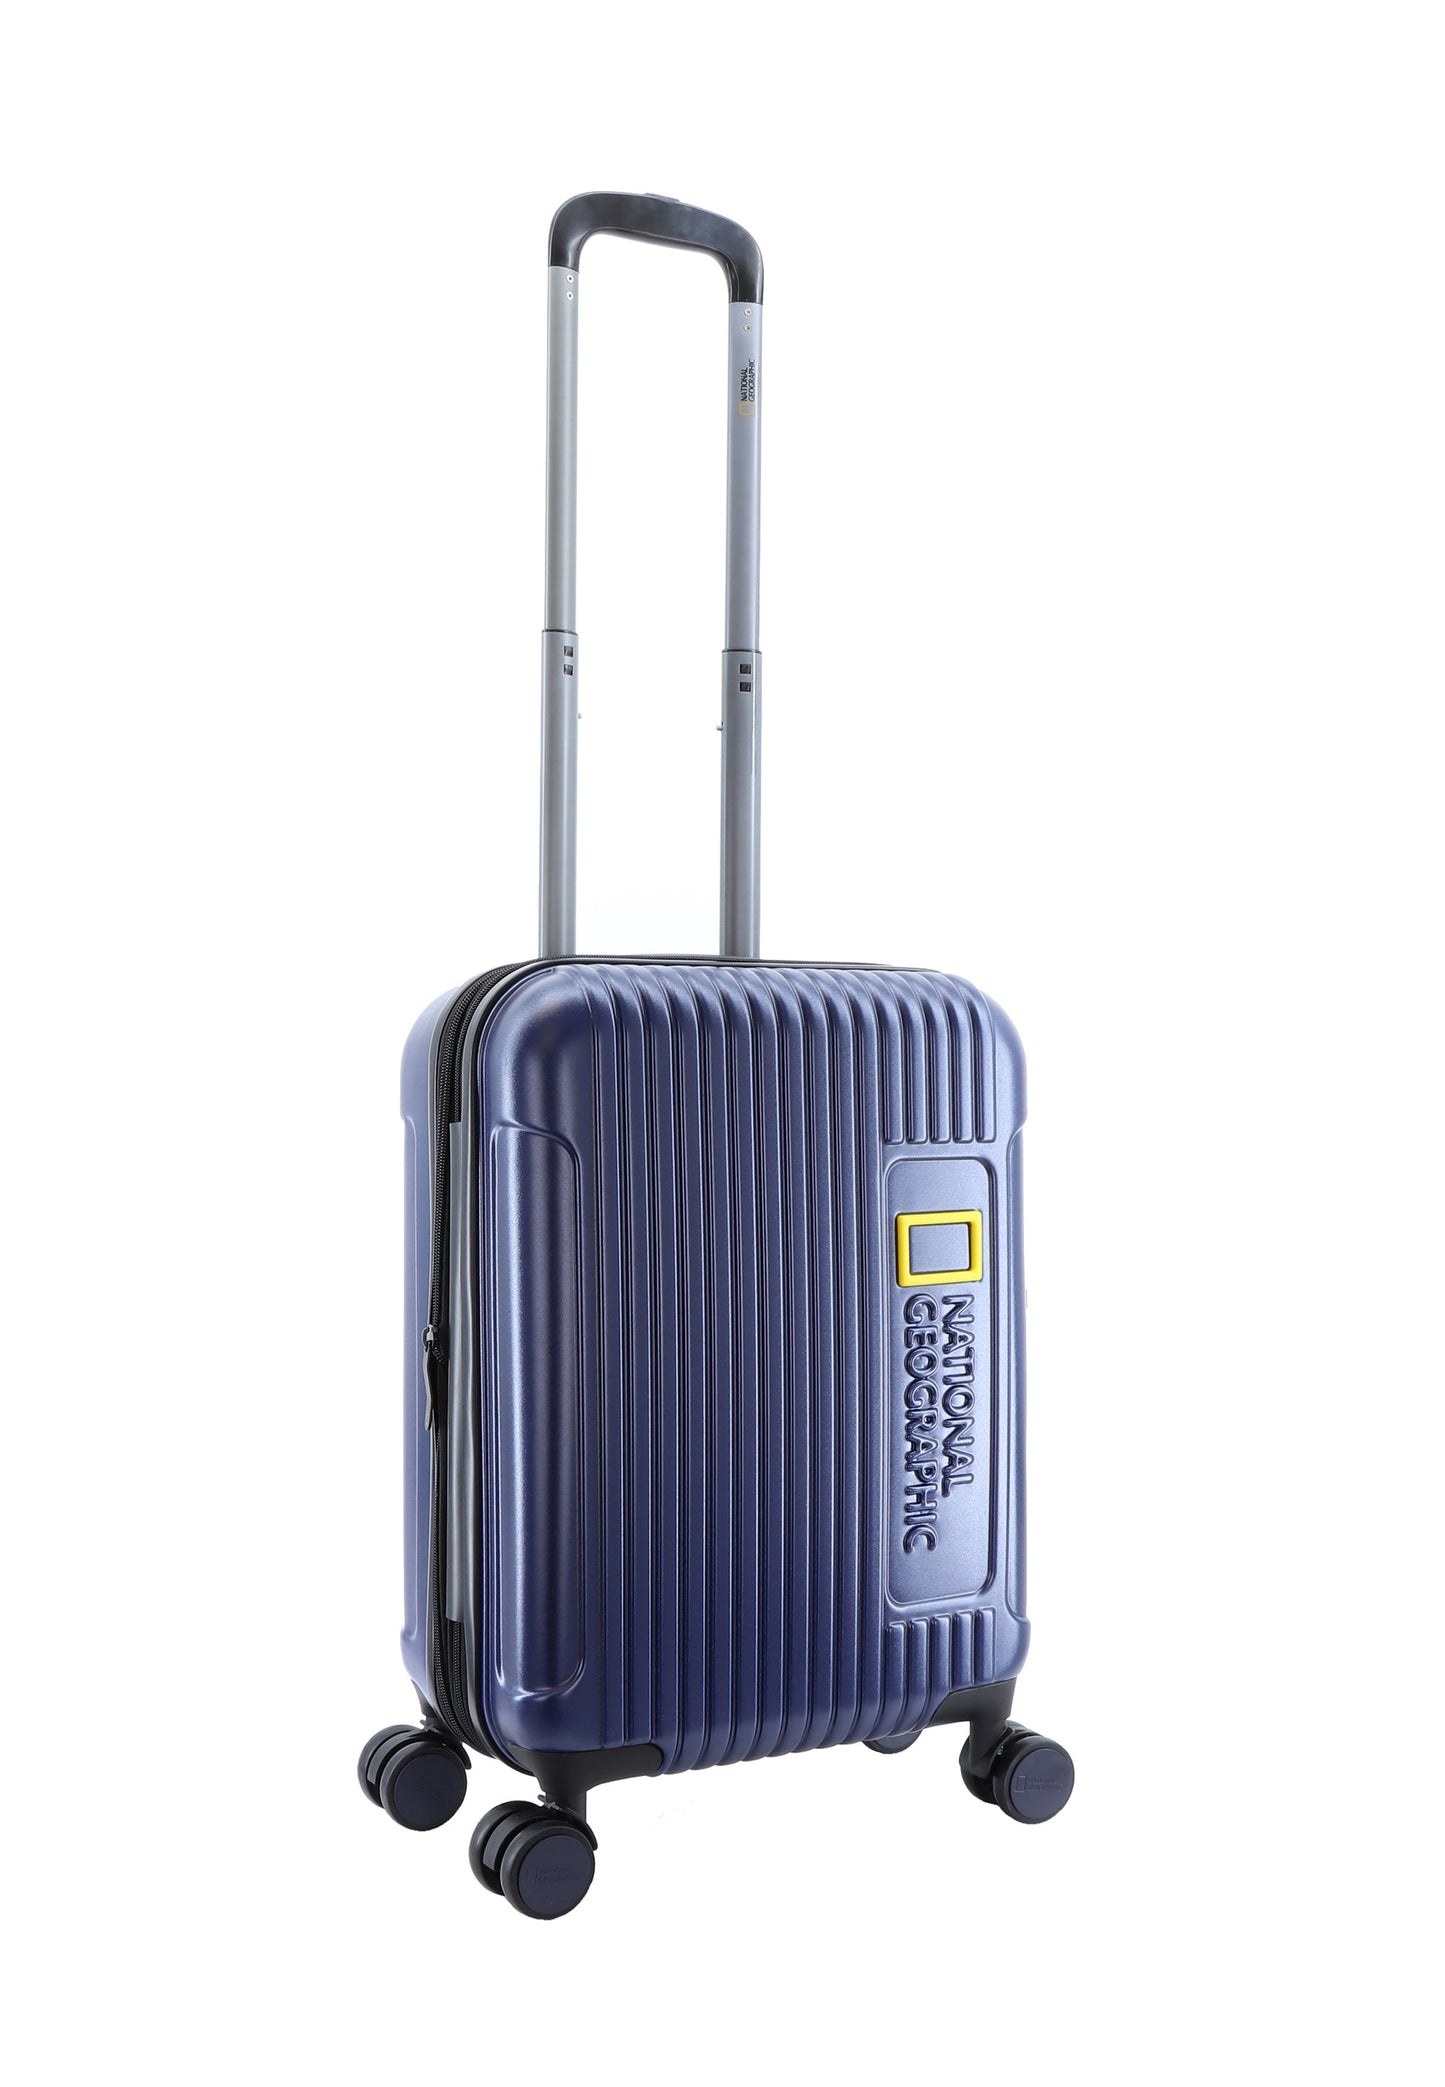 National Geographic Canyon S - Voorkant Blauw hard reiskoffer | luggage4u.be